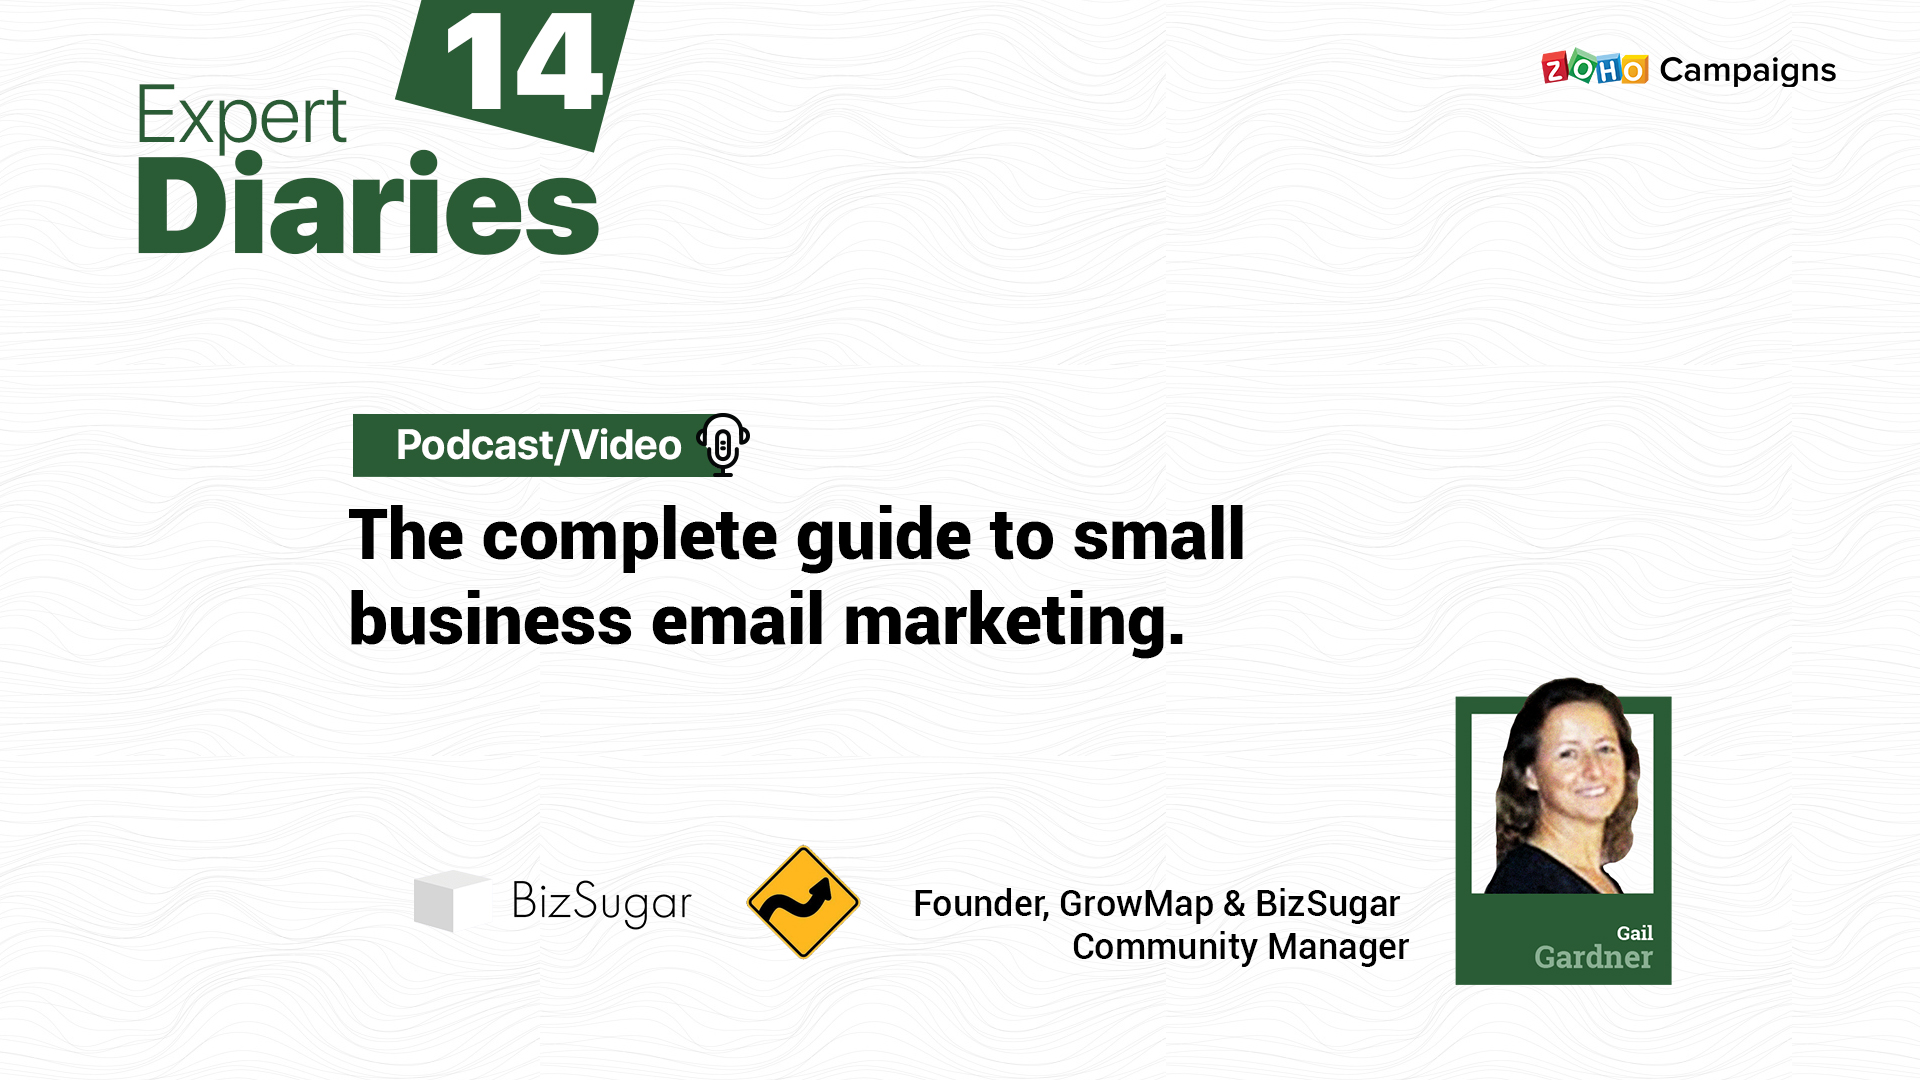 The complete guide to small business email marketing